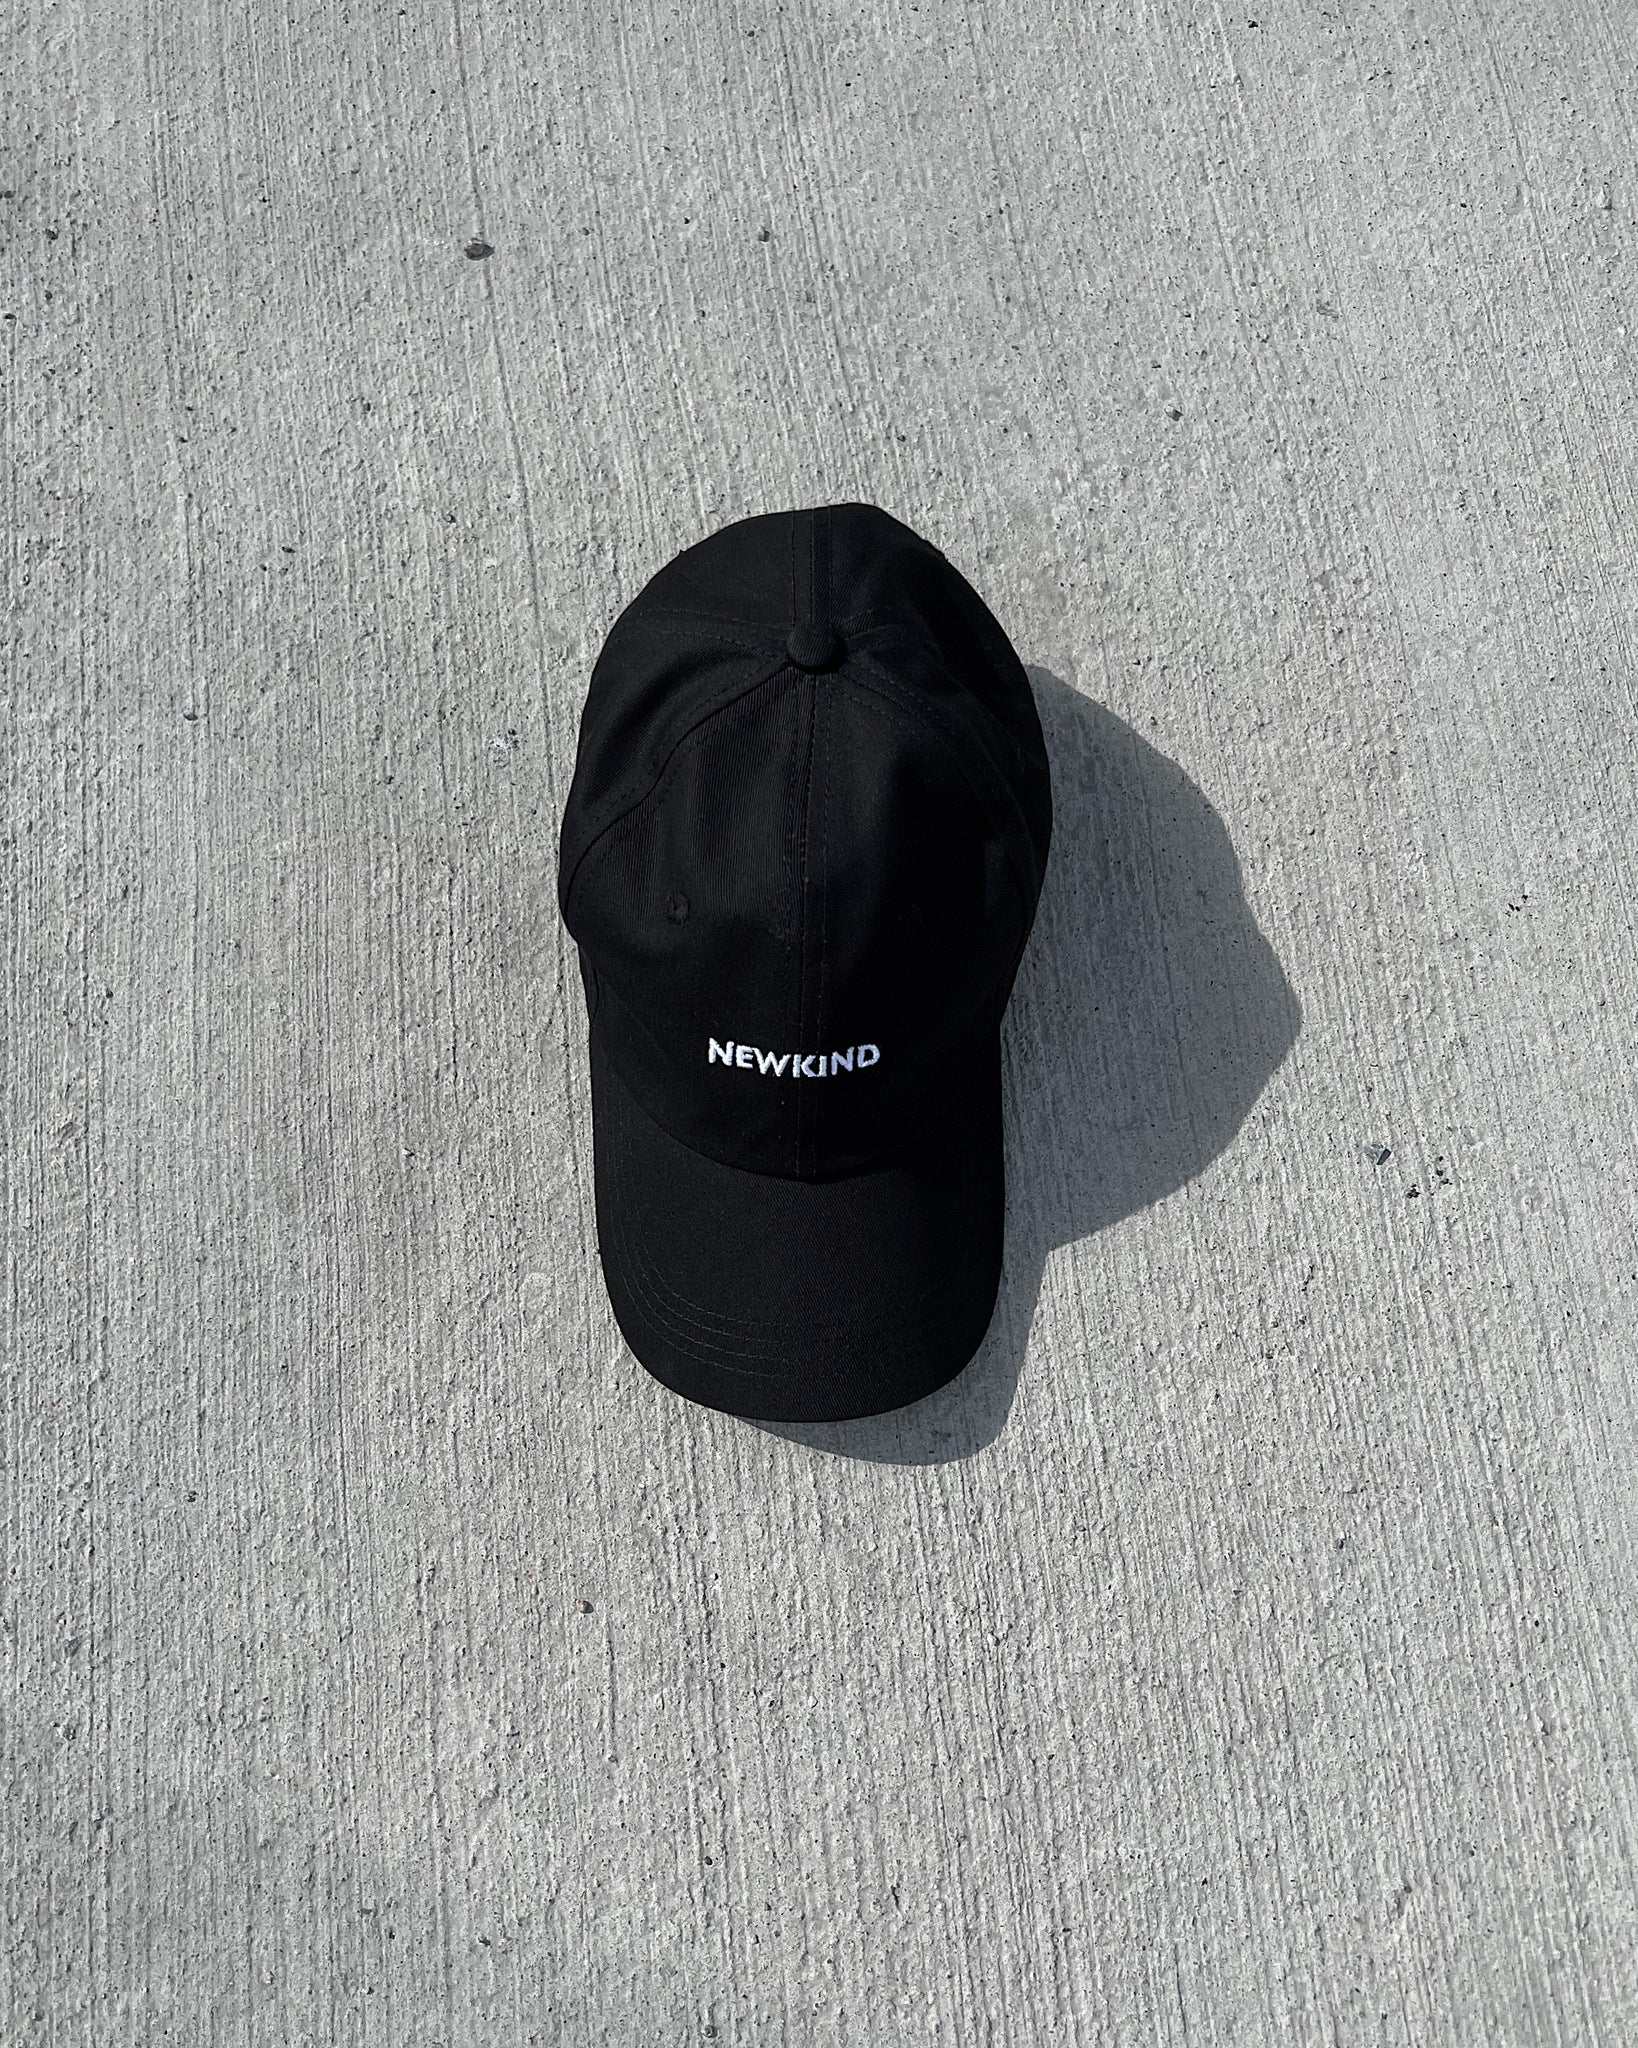 Newkind baseball cap in black. The cap features Newkind branding throughout and a metal clip fastening at the back.  - Embroidery logo  - 6 Panel baseball cap    - Composition: 100% cotton